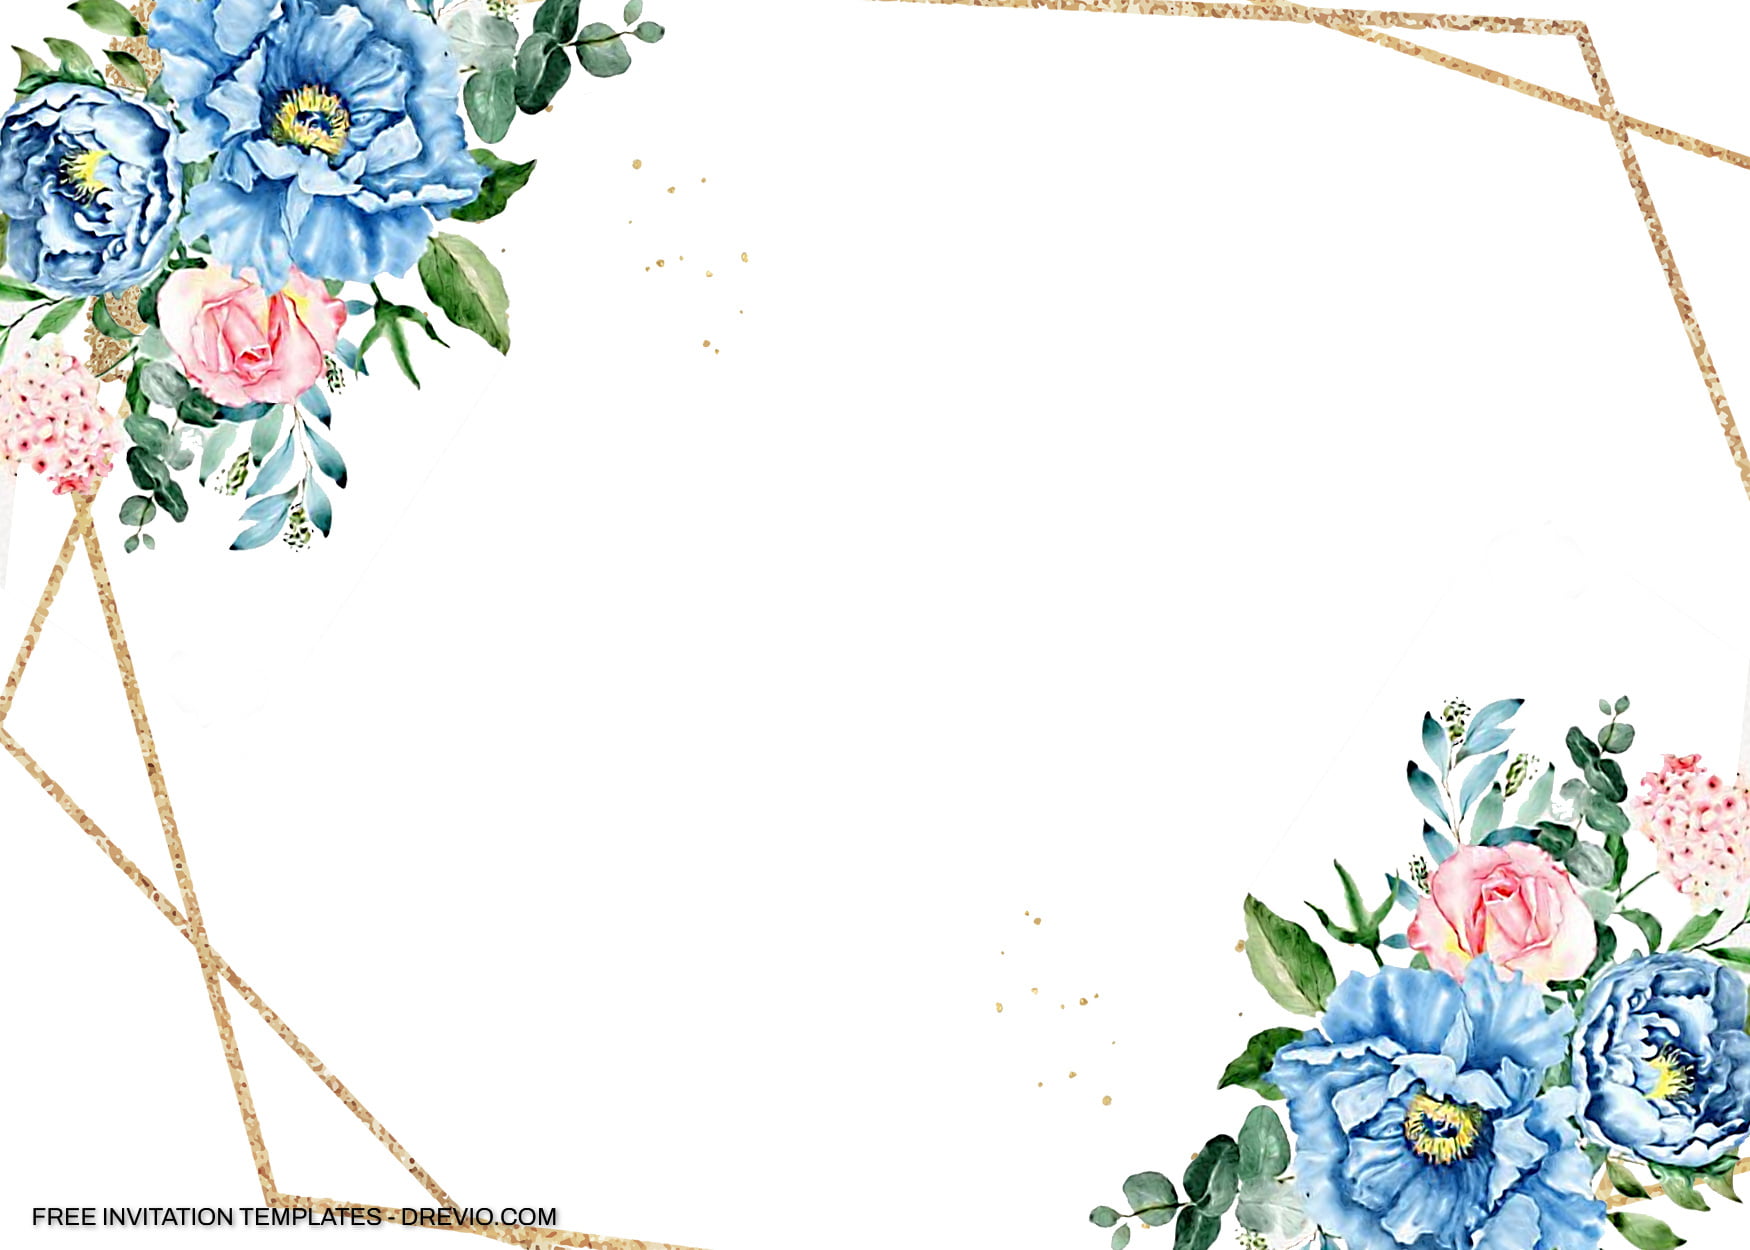 7+ Blue And White Floral Theory Invitation Templates